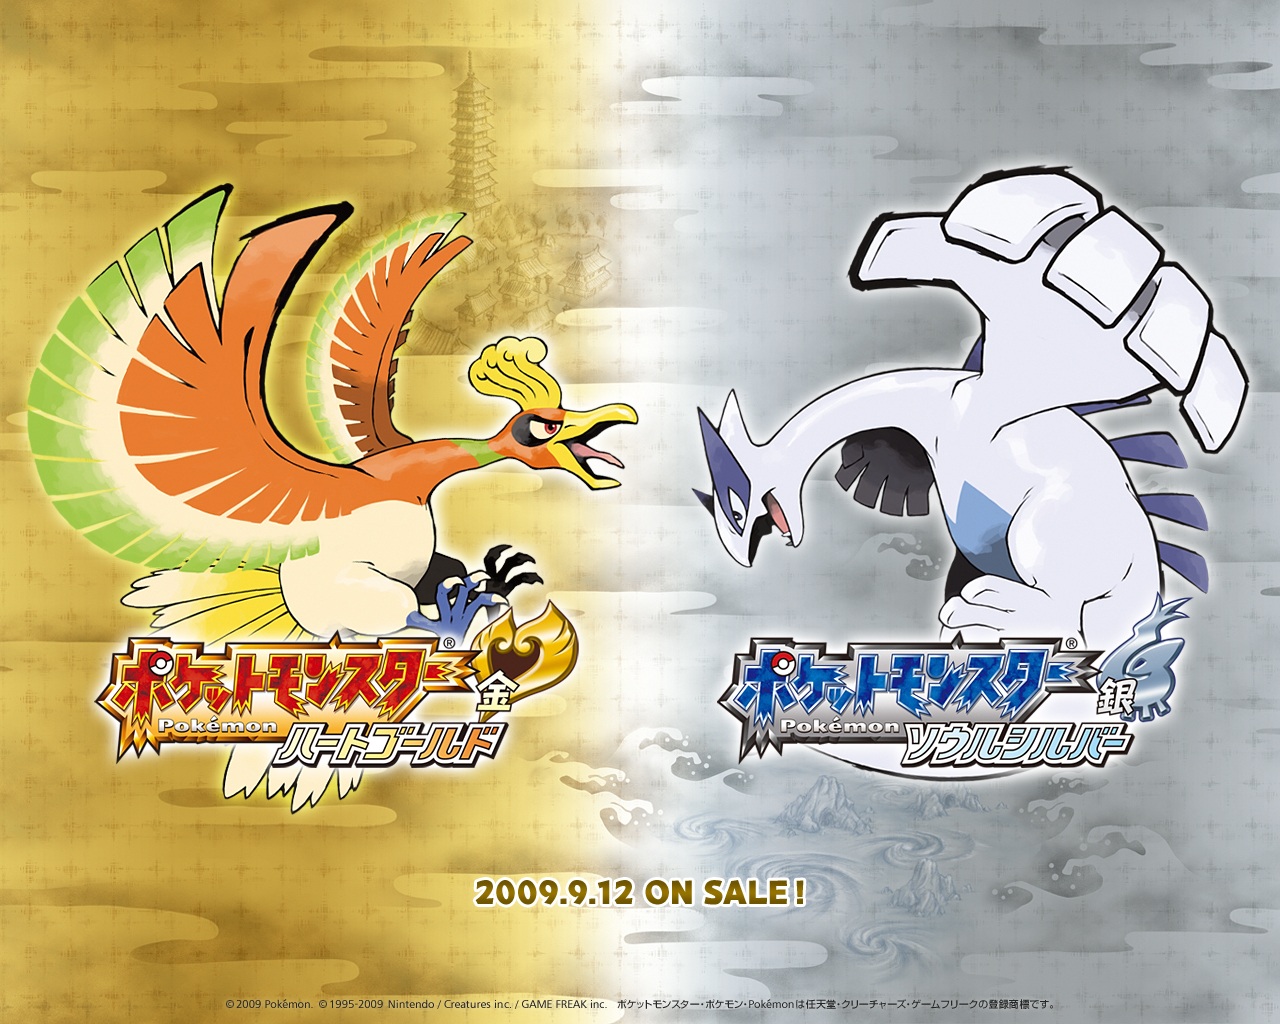 [nds] Top 10 game NDS hay nhất 2010  Pokemon-heartgold-soulsilver-wallpaper-1